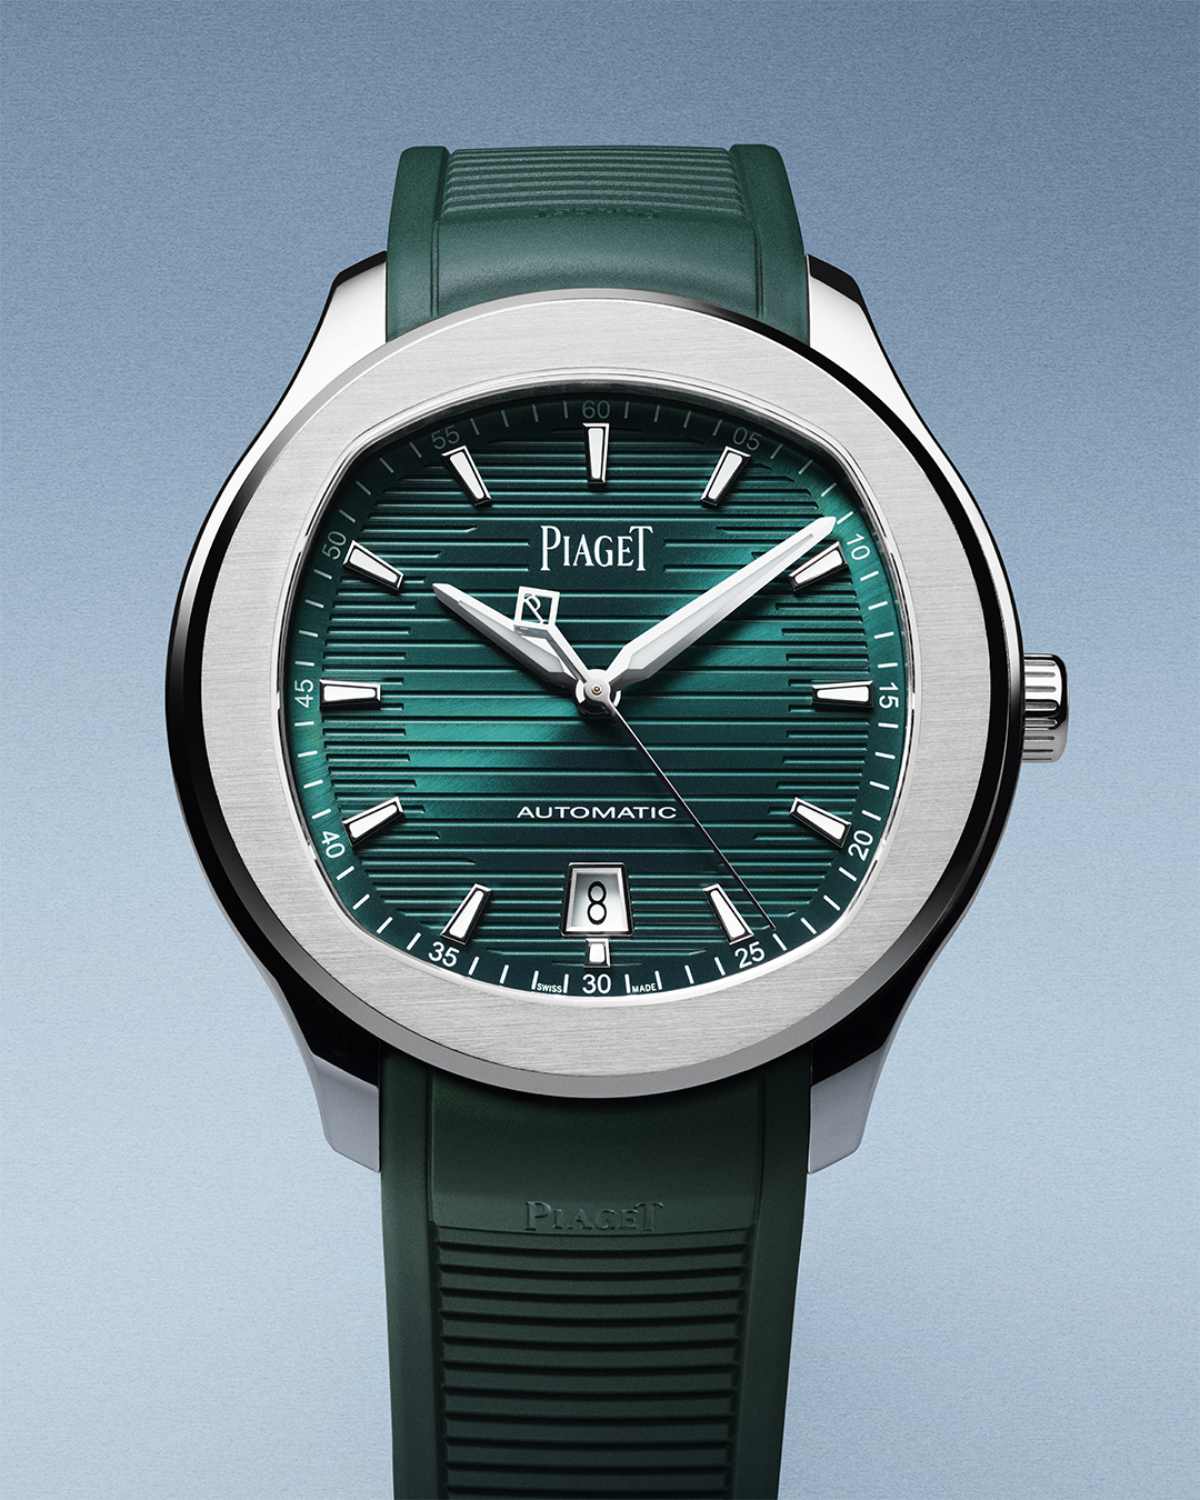 Piaget Presents Its New Polo Field Watch